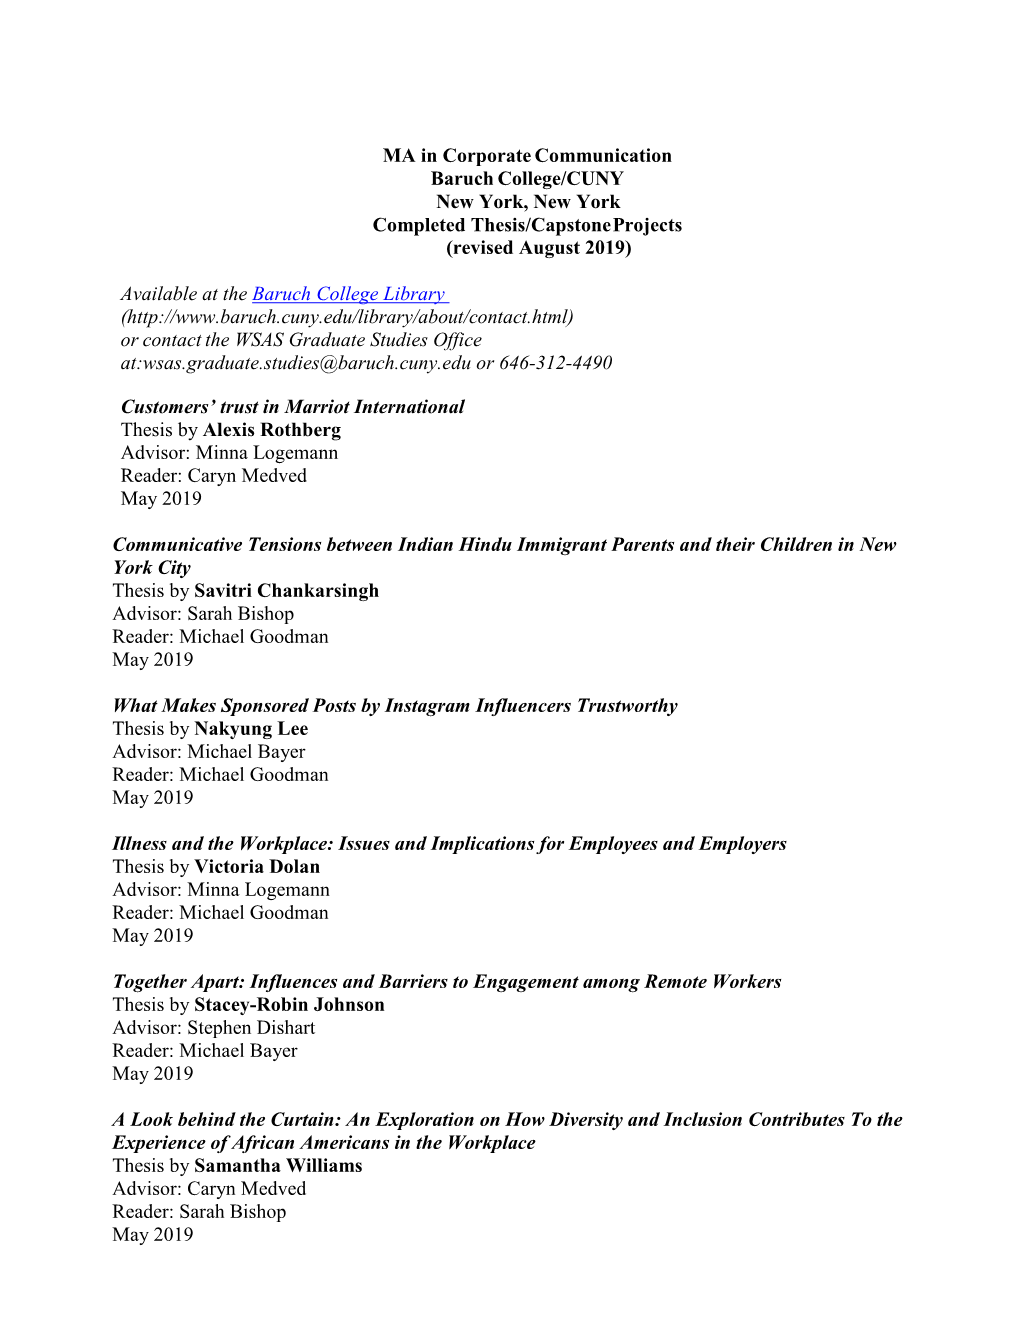 MA in Corporate Communication Baruch College/CUNY New York, New York Completed Thesis/Capstone Projects (Revised August 2019)